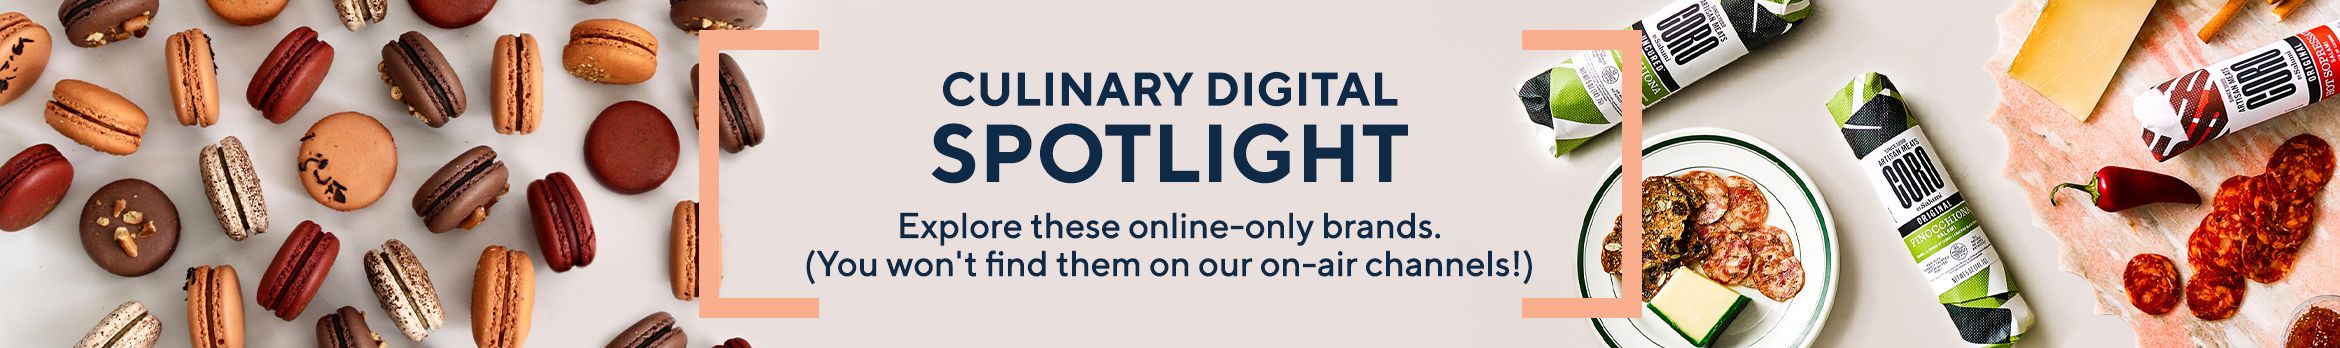 Culinary Digital Spotlight   Explore these online-only brands. (You won't find them on our on-air channels!)